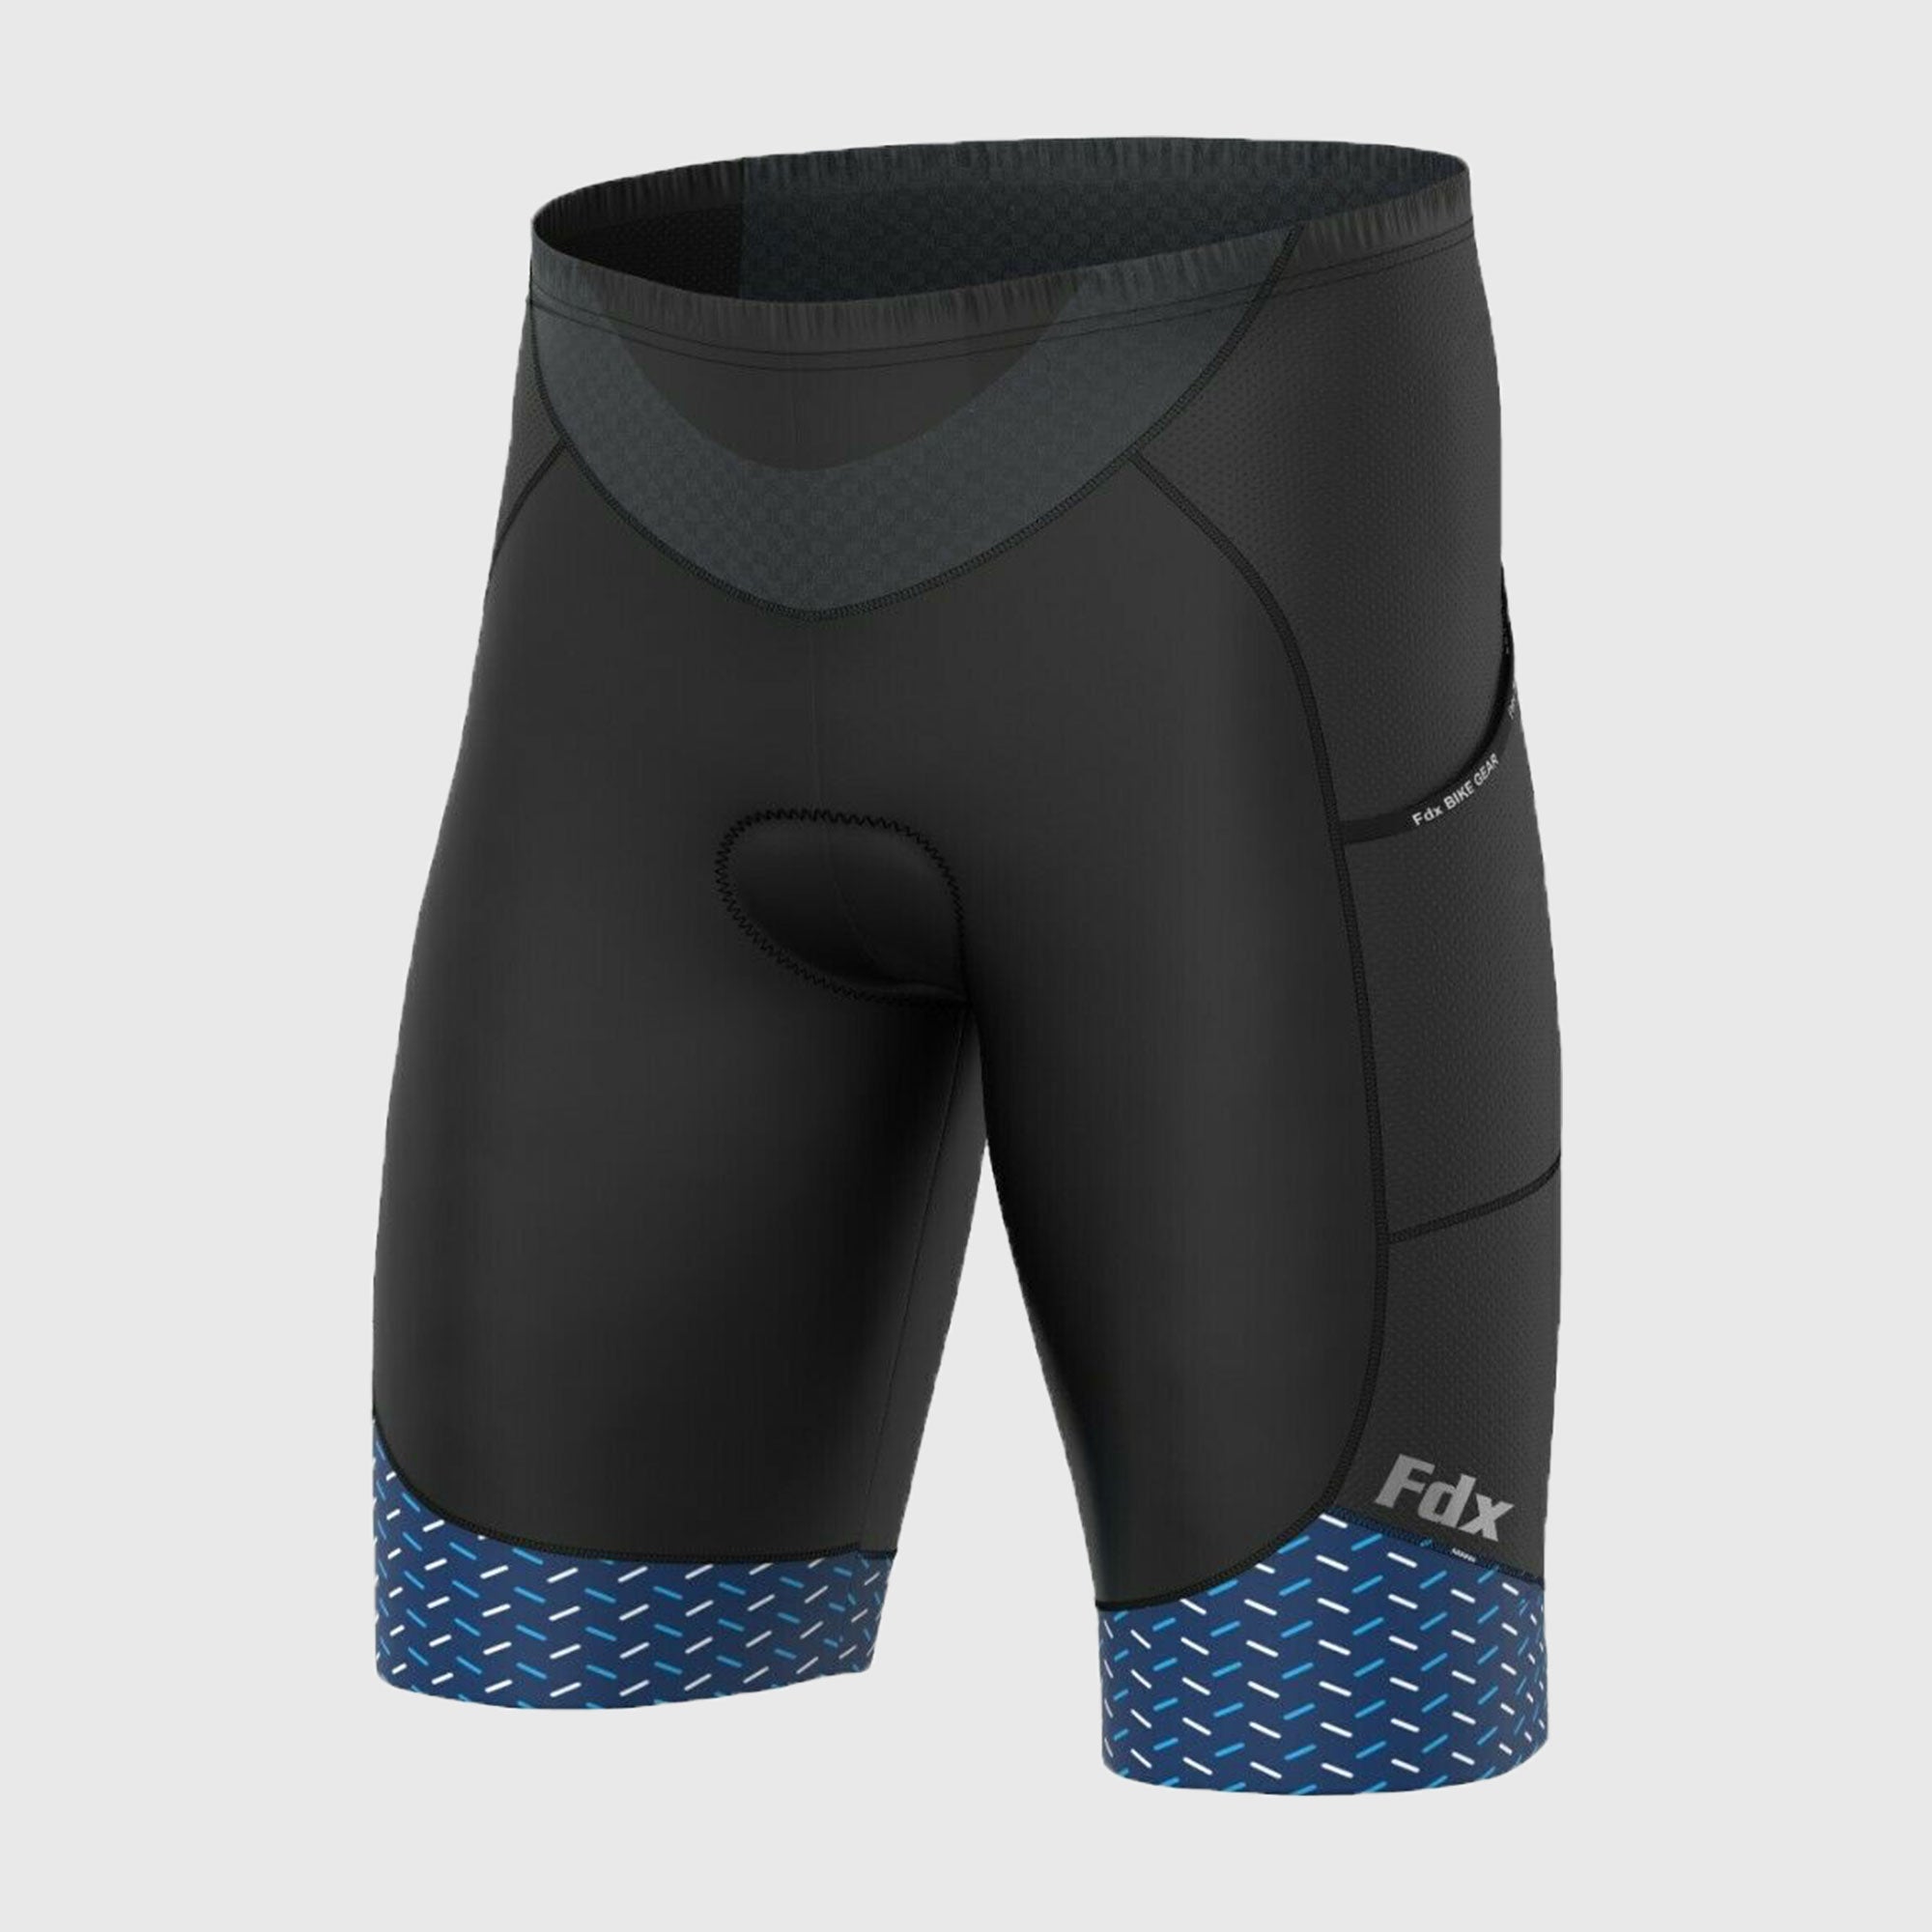 Men’s Black & Blue Cycling Shorts 3D Gel Padded comfortable road bike shorts - Breathable Quick Dry biking shorts, ultra-lightweight shorts with pockets